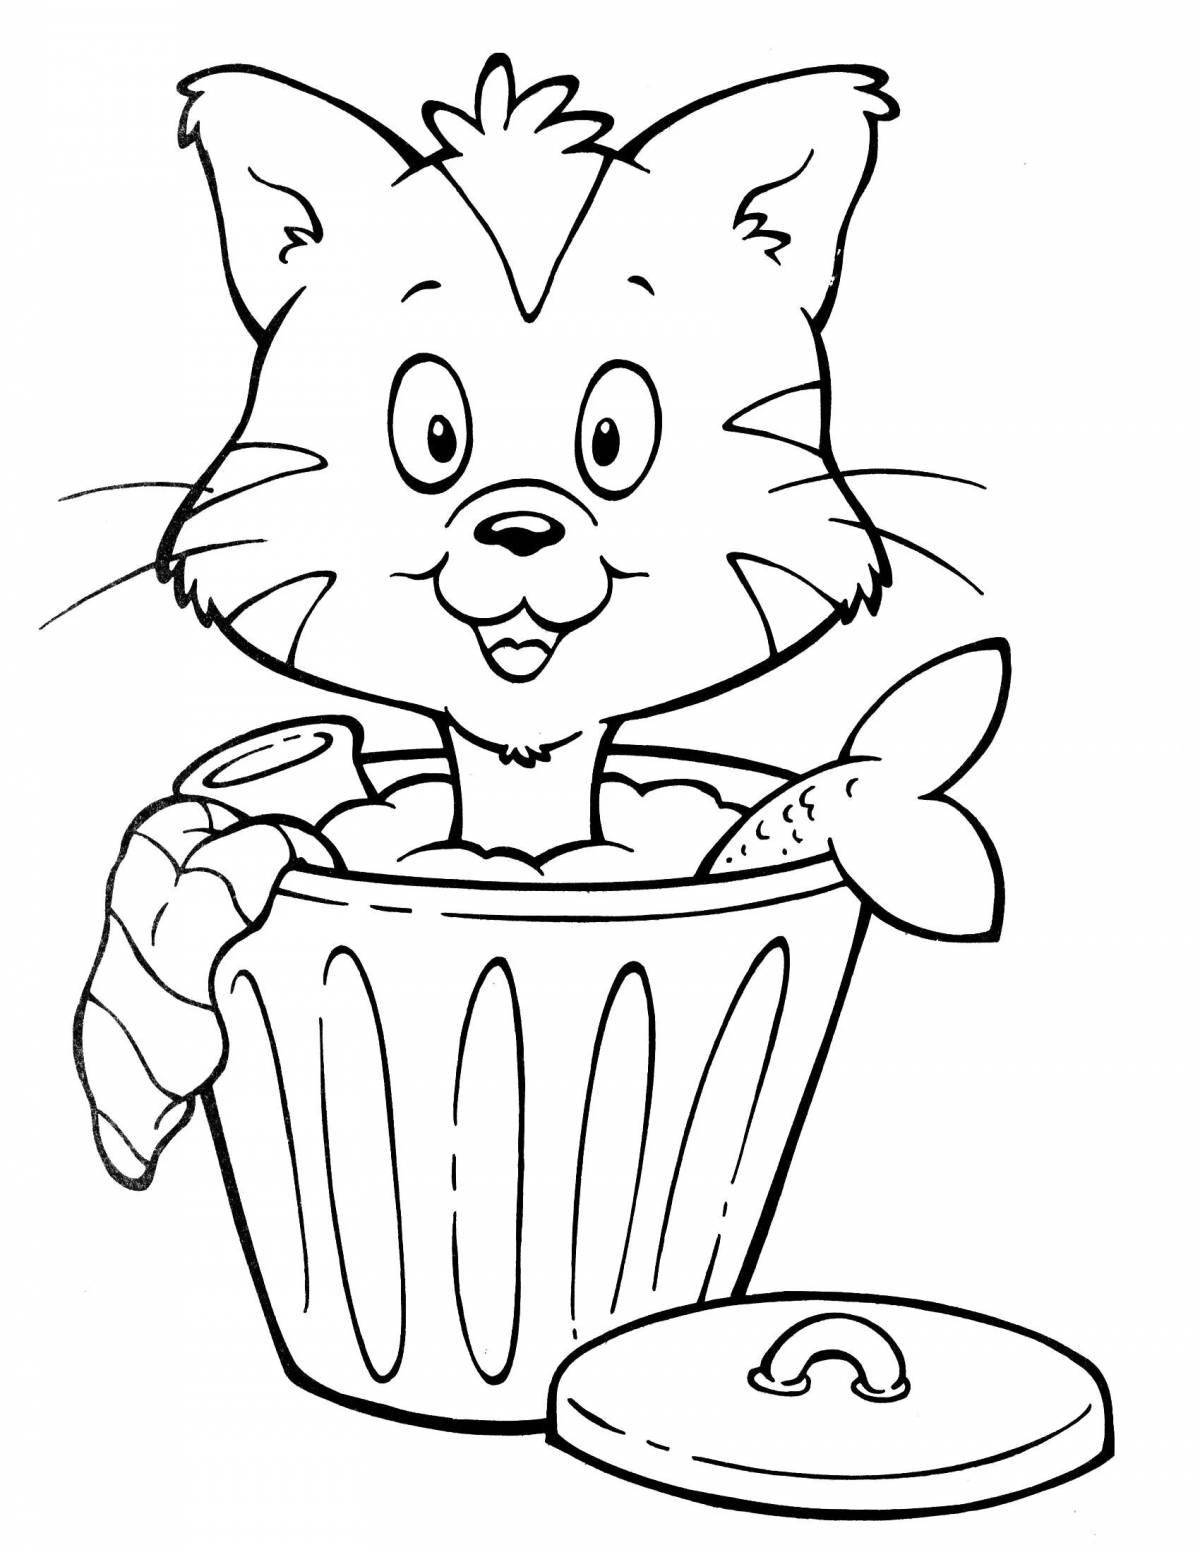 Coloring book funny kitten in a cup